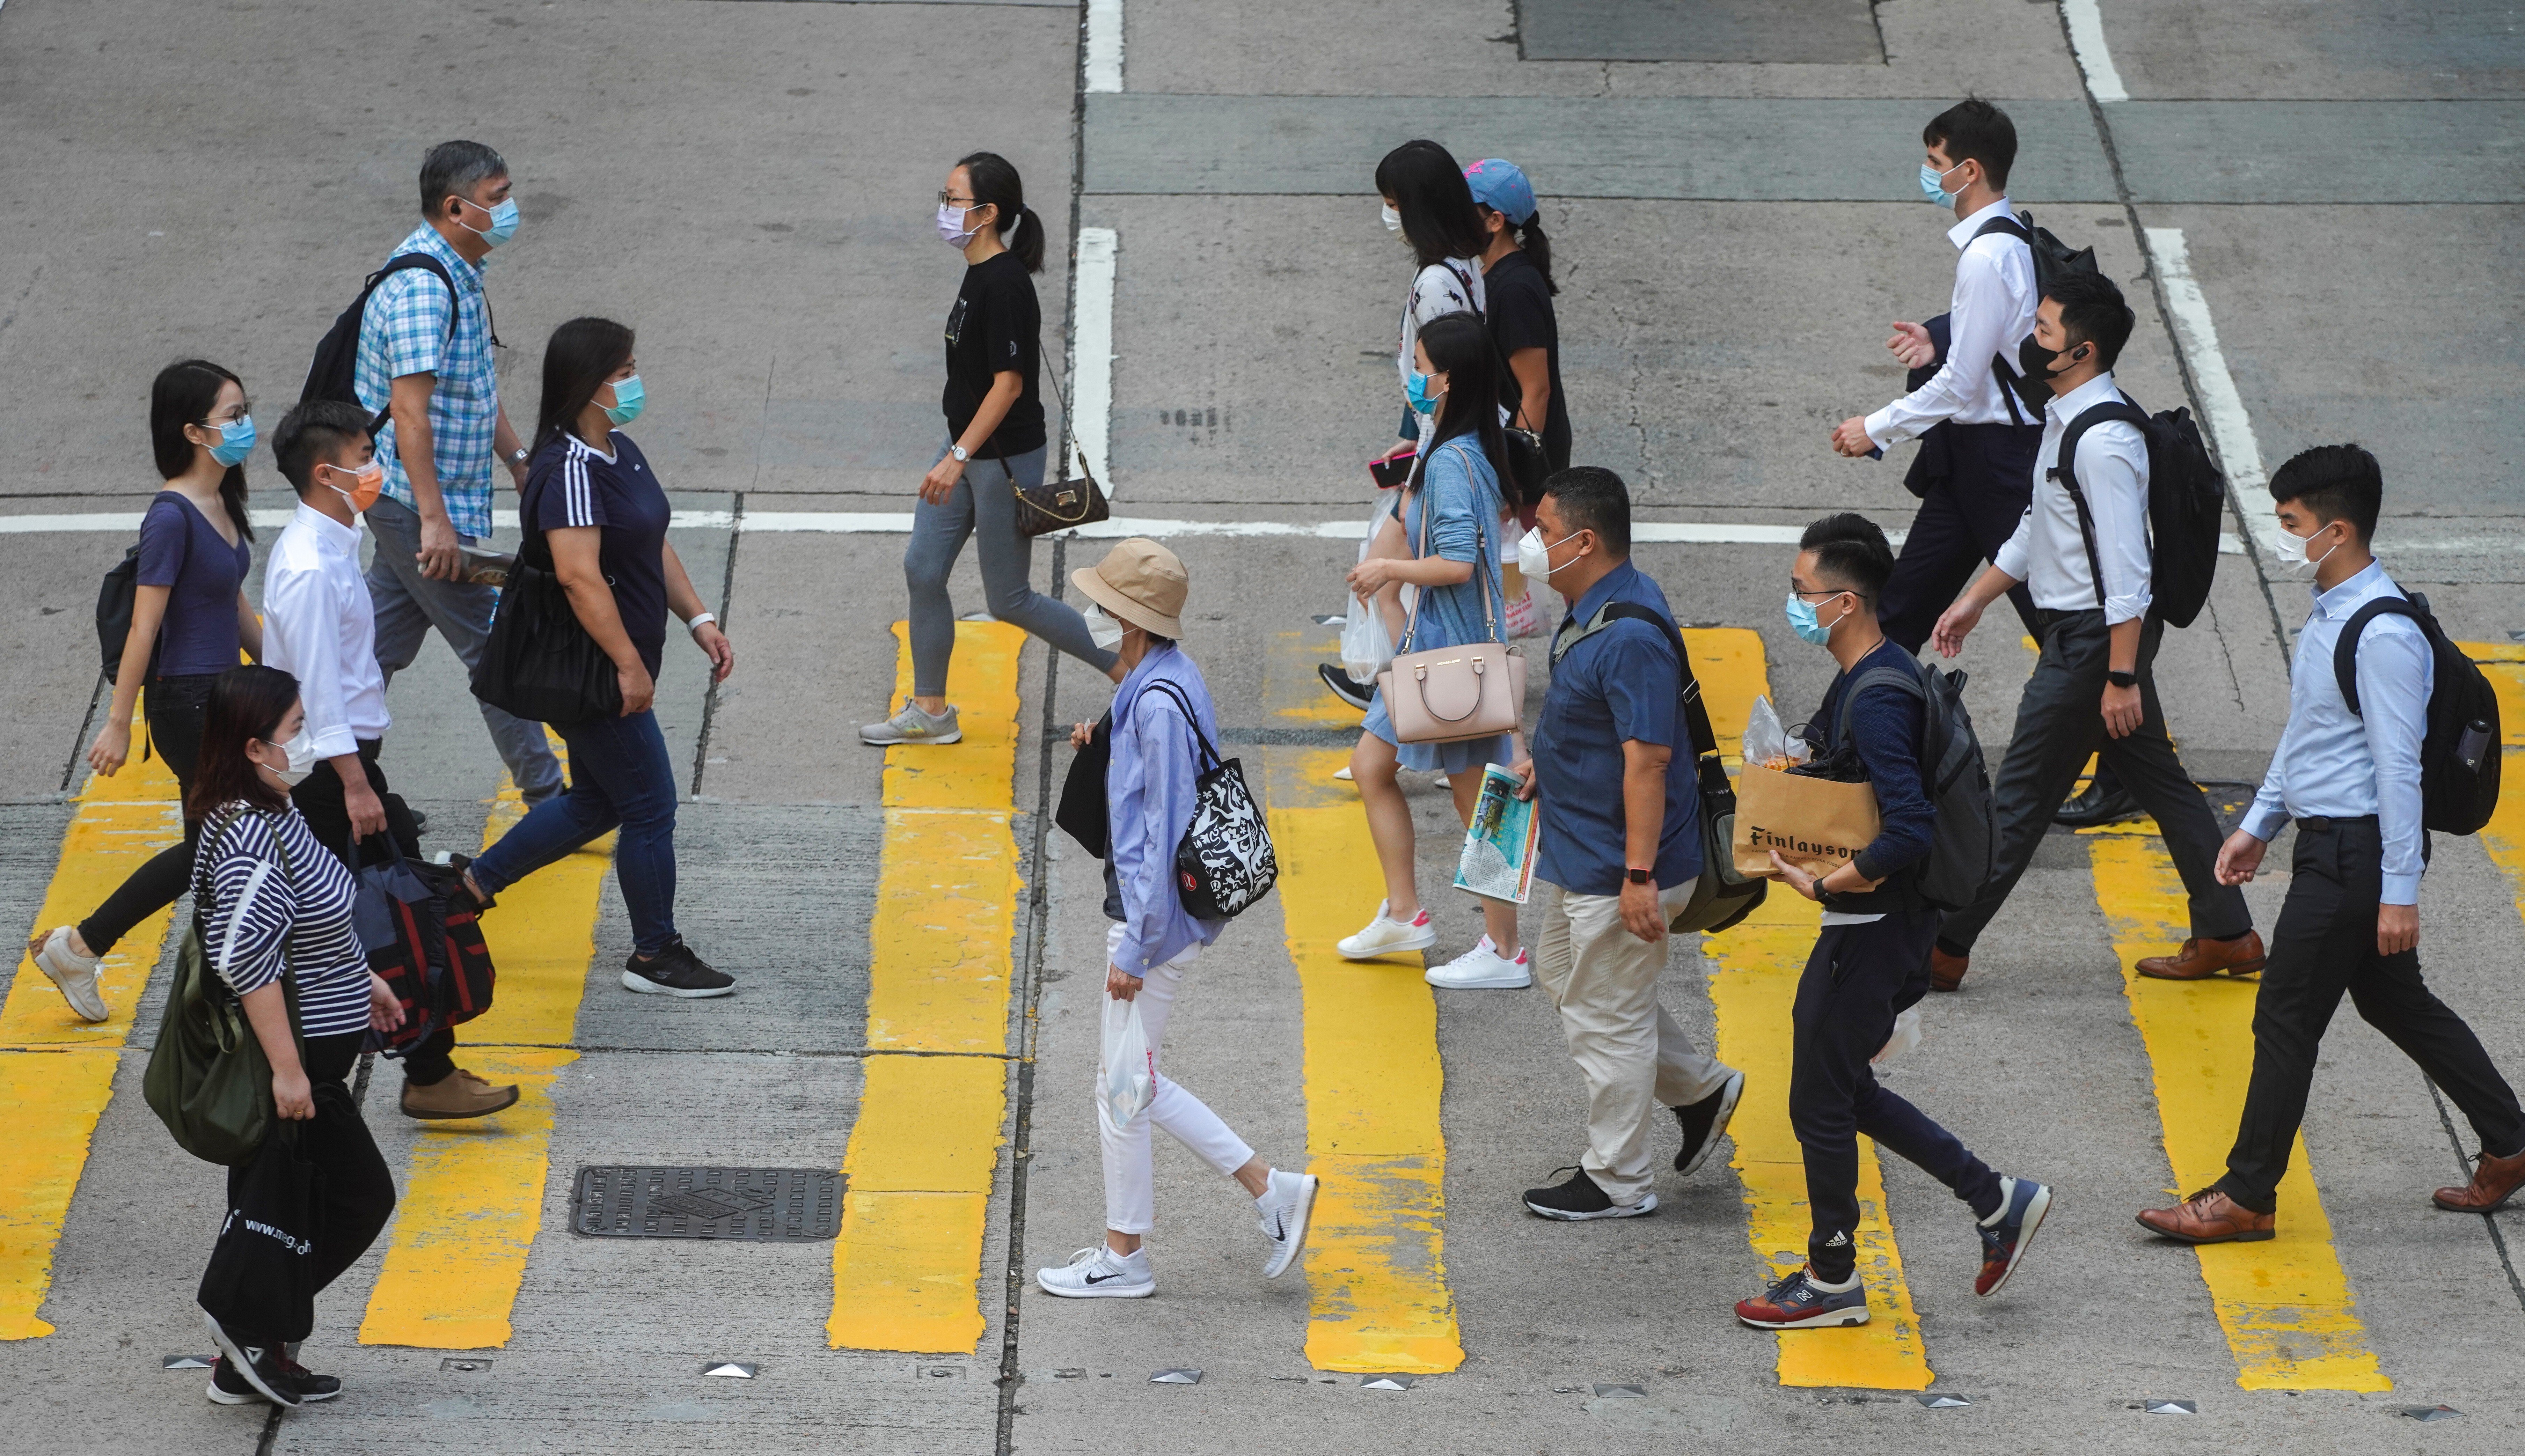 Hong Kong’s GDP is growing, but not all workers are seeing that reflected in their earnings, the city’s financial chief says. Photo: Winson Wong